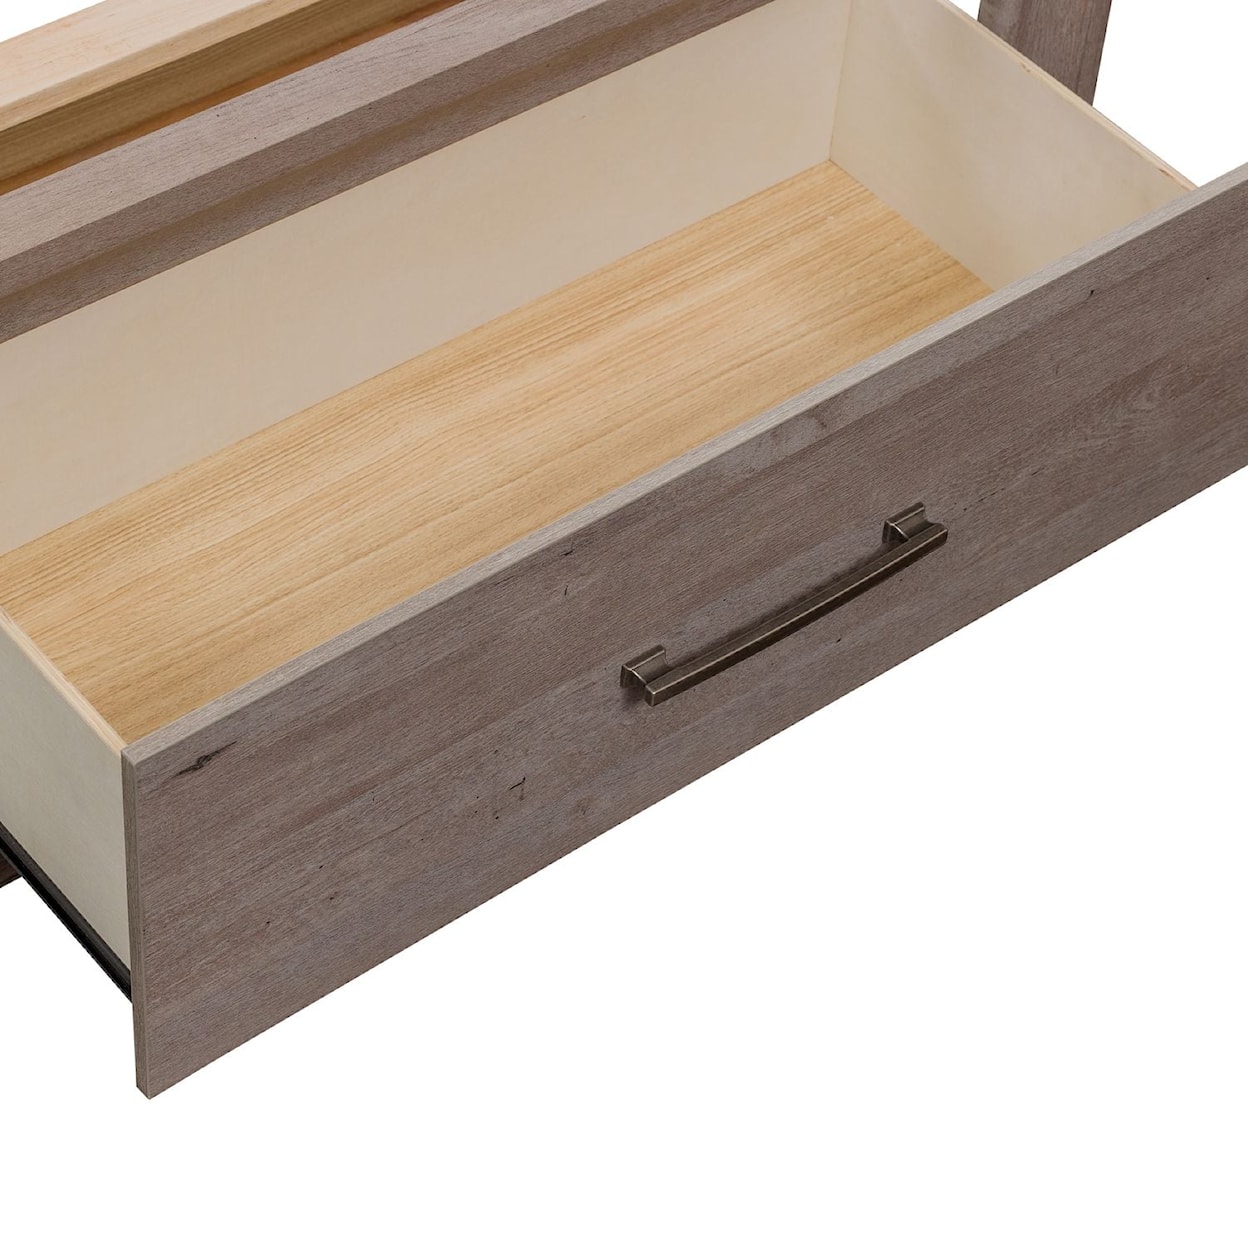 Libby Horizons Twin Storage Bed